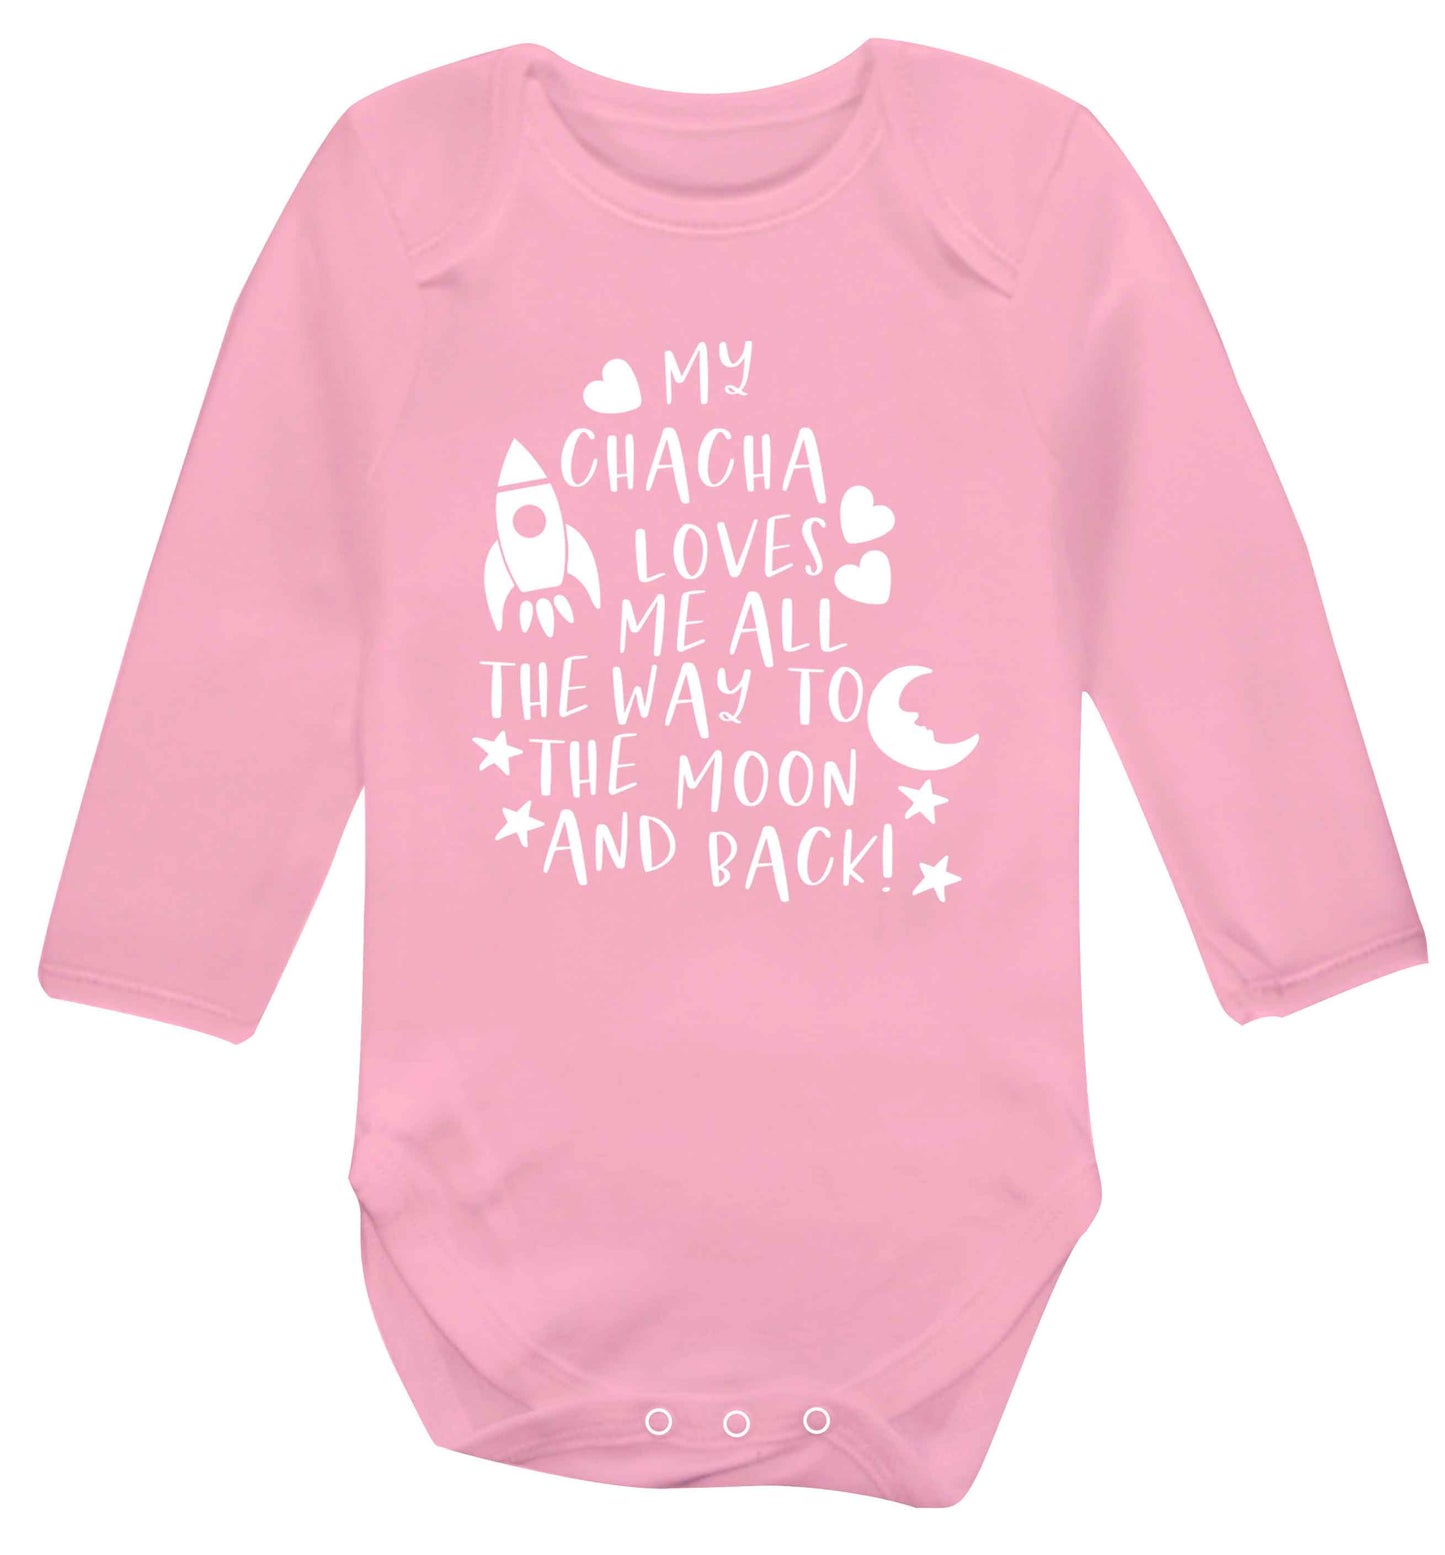 My chacha loves me all the way to the moon and back Baby Vest long sleeved pale pink 6-12 months